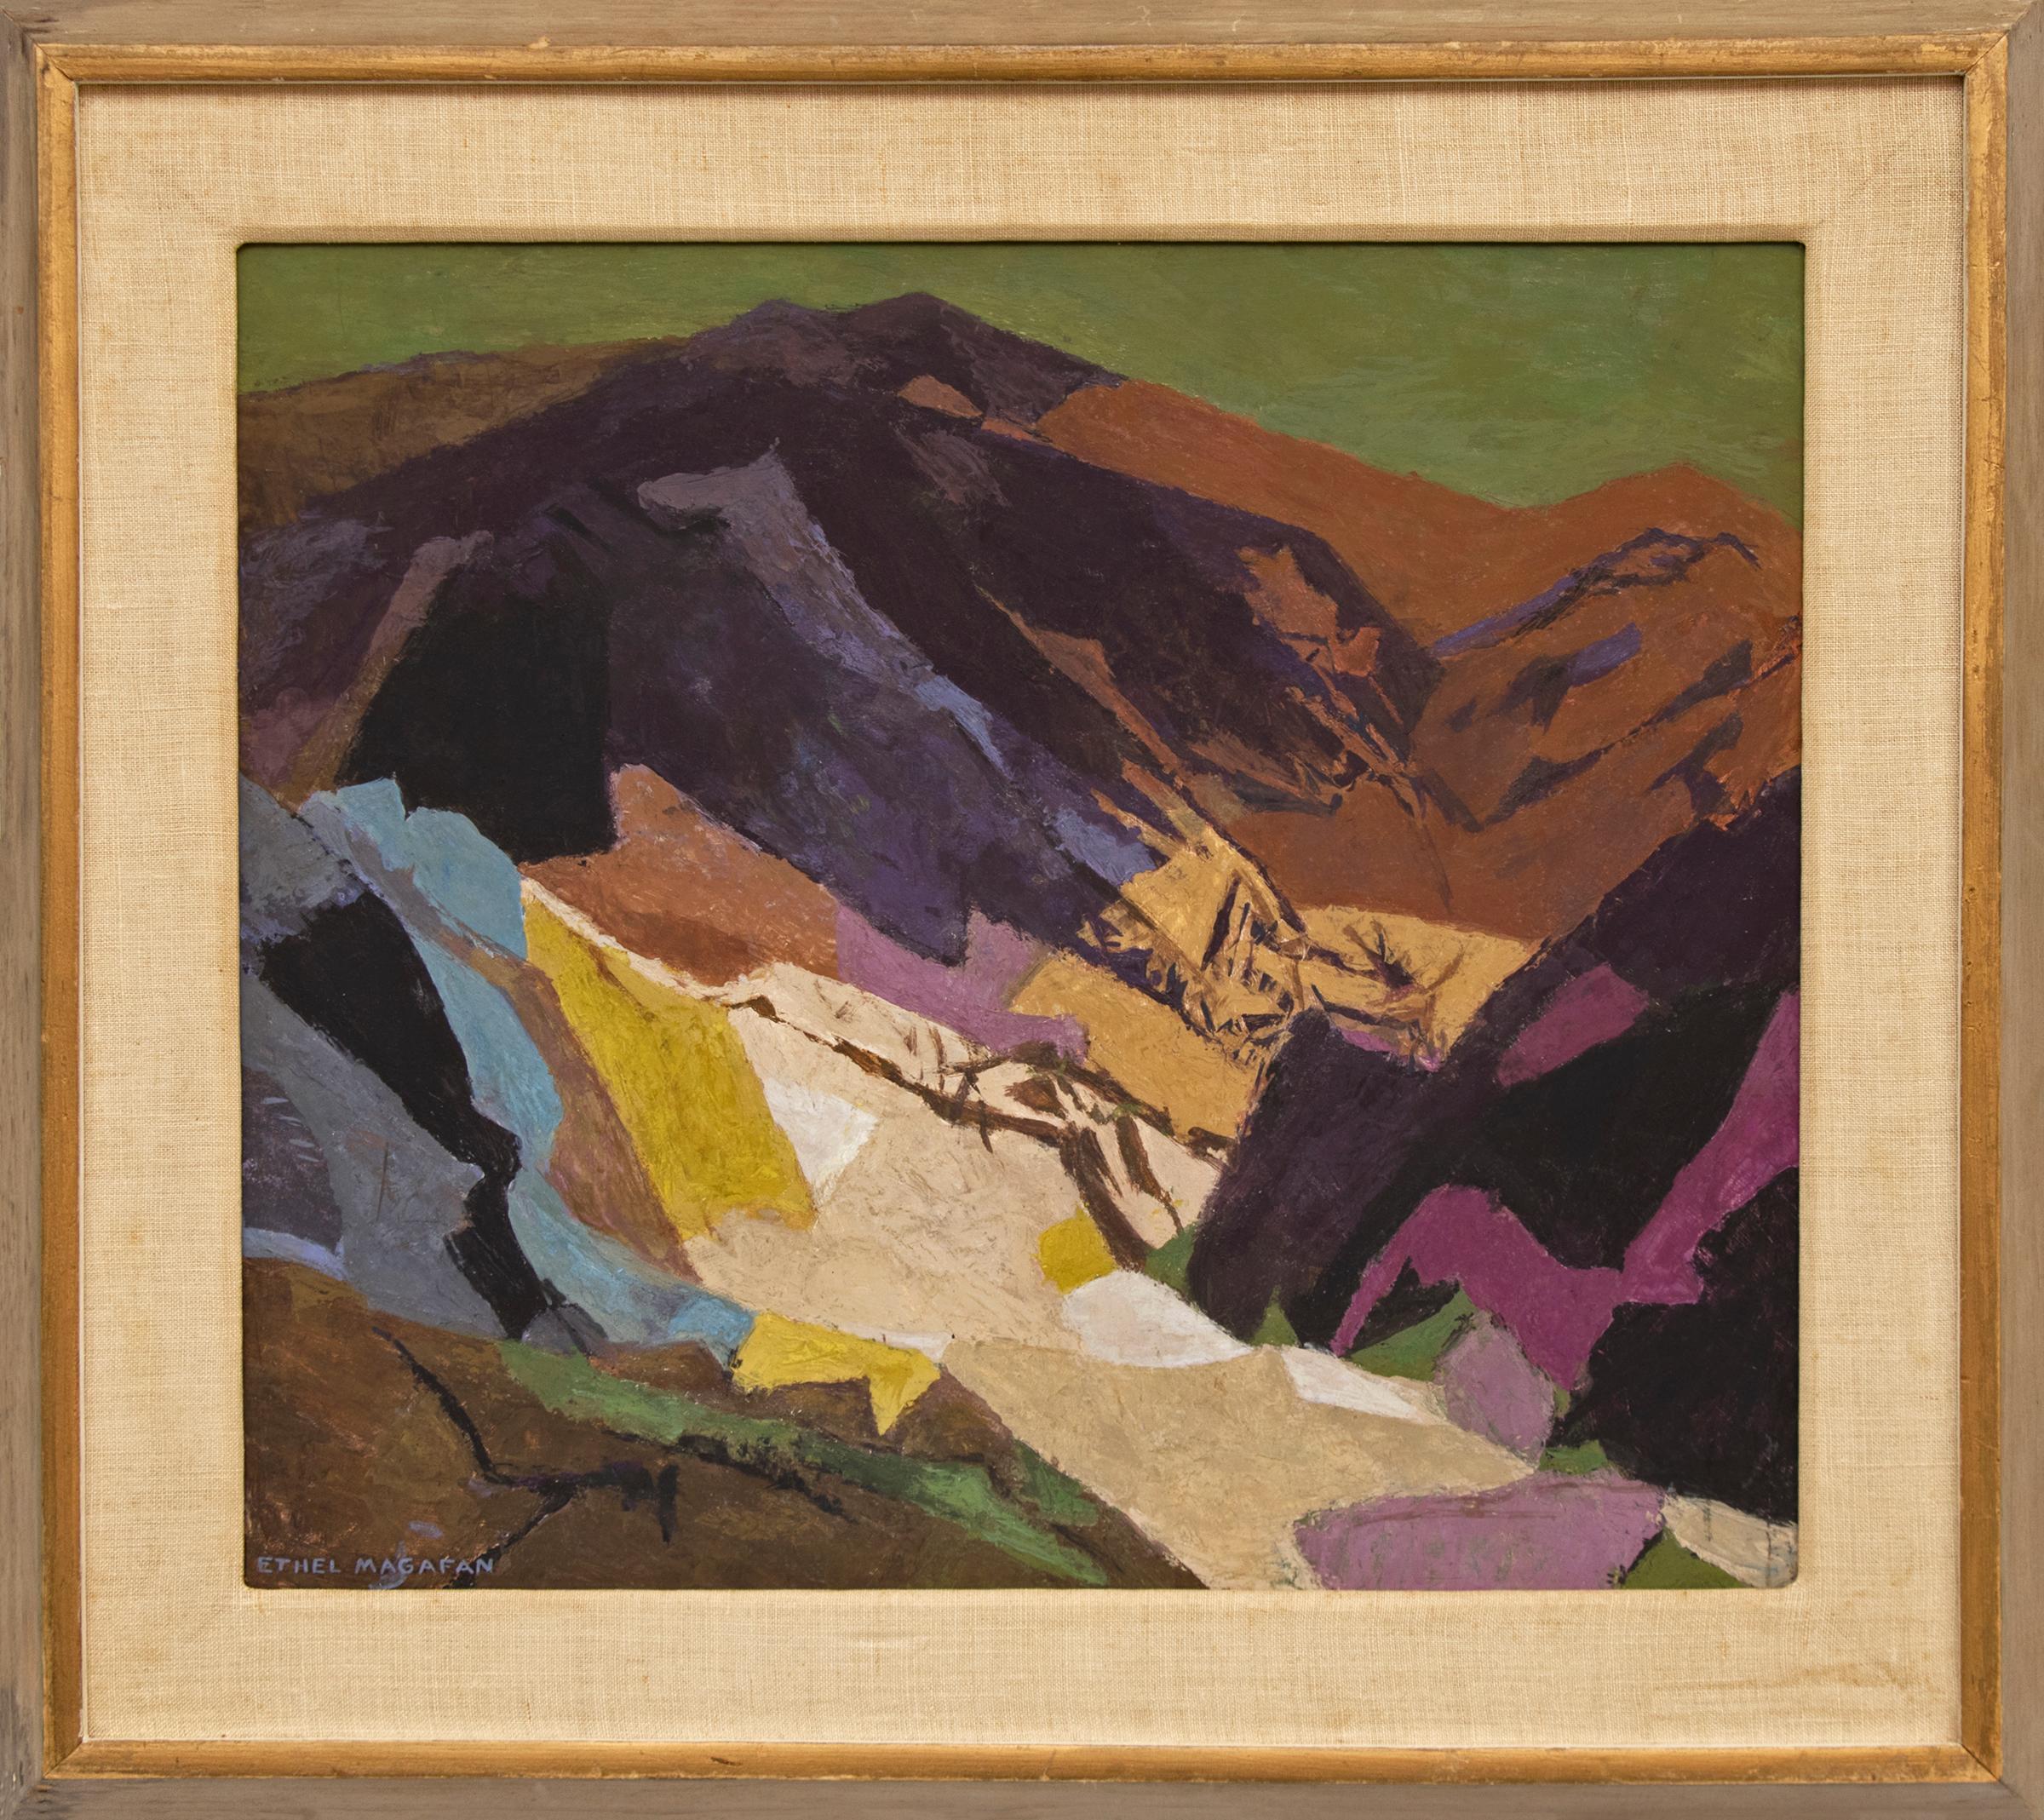 Distant Country (Semi-Abstract Mountain Landscape: Purple, Gold, Green, Brown) - Painting by Ethel Magafan